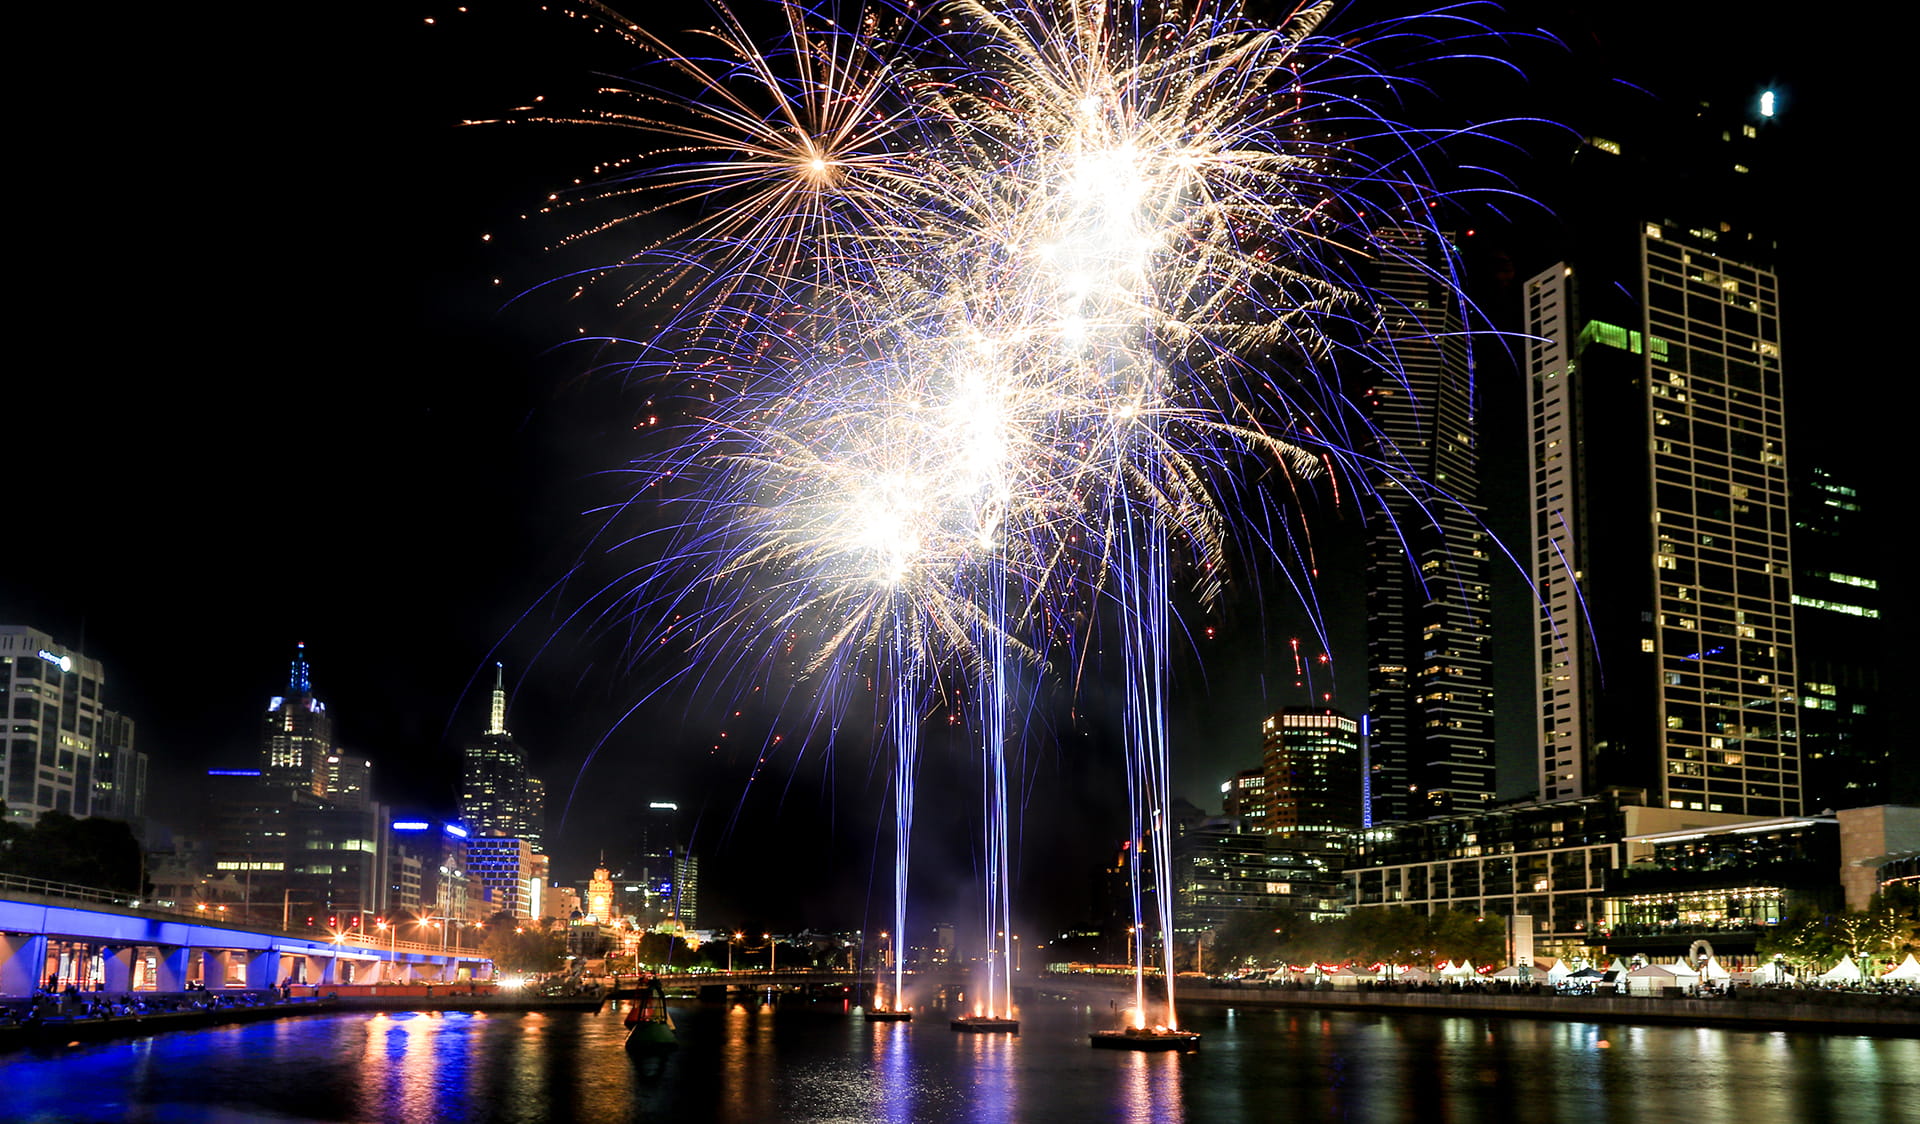 Fireworks display over a river running between city buildings.